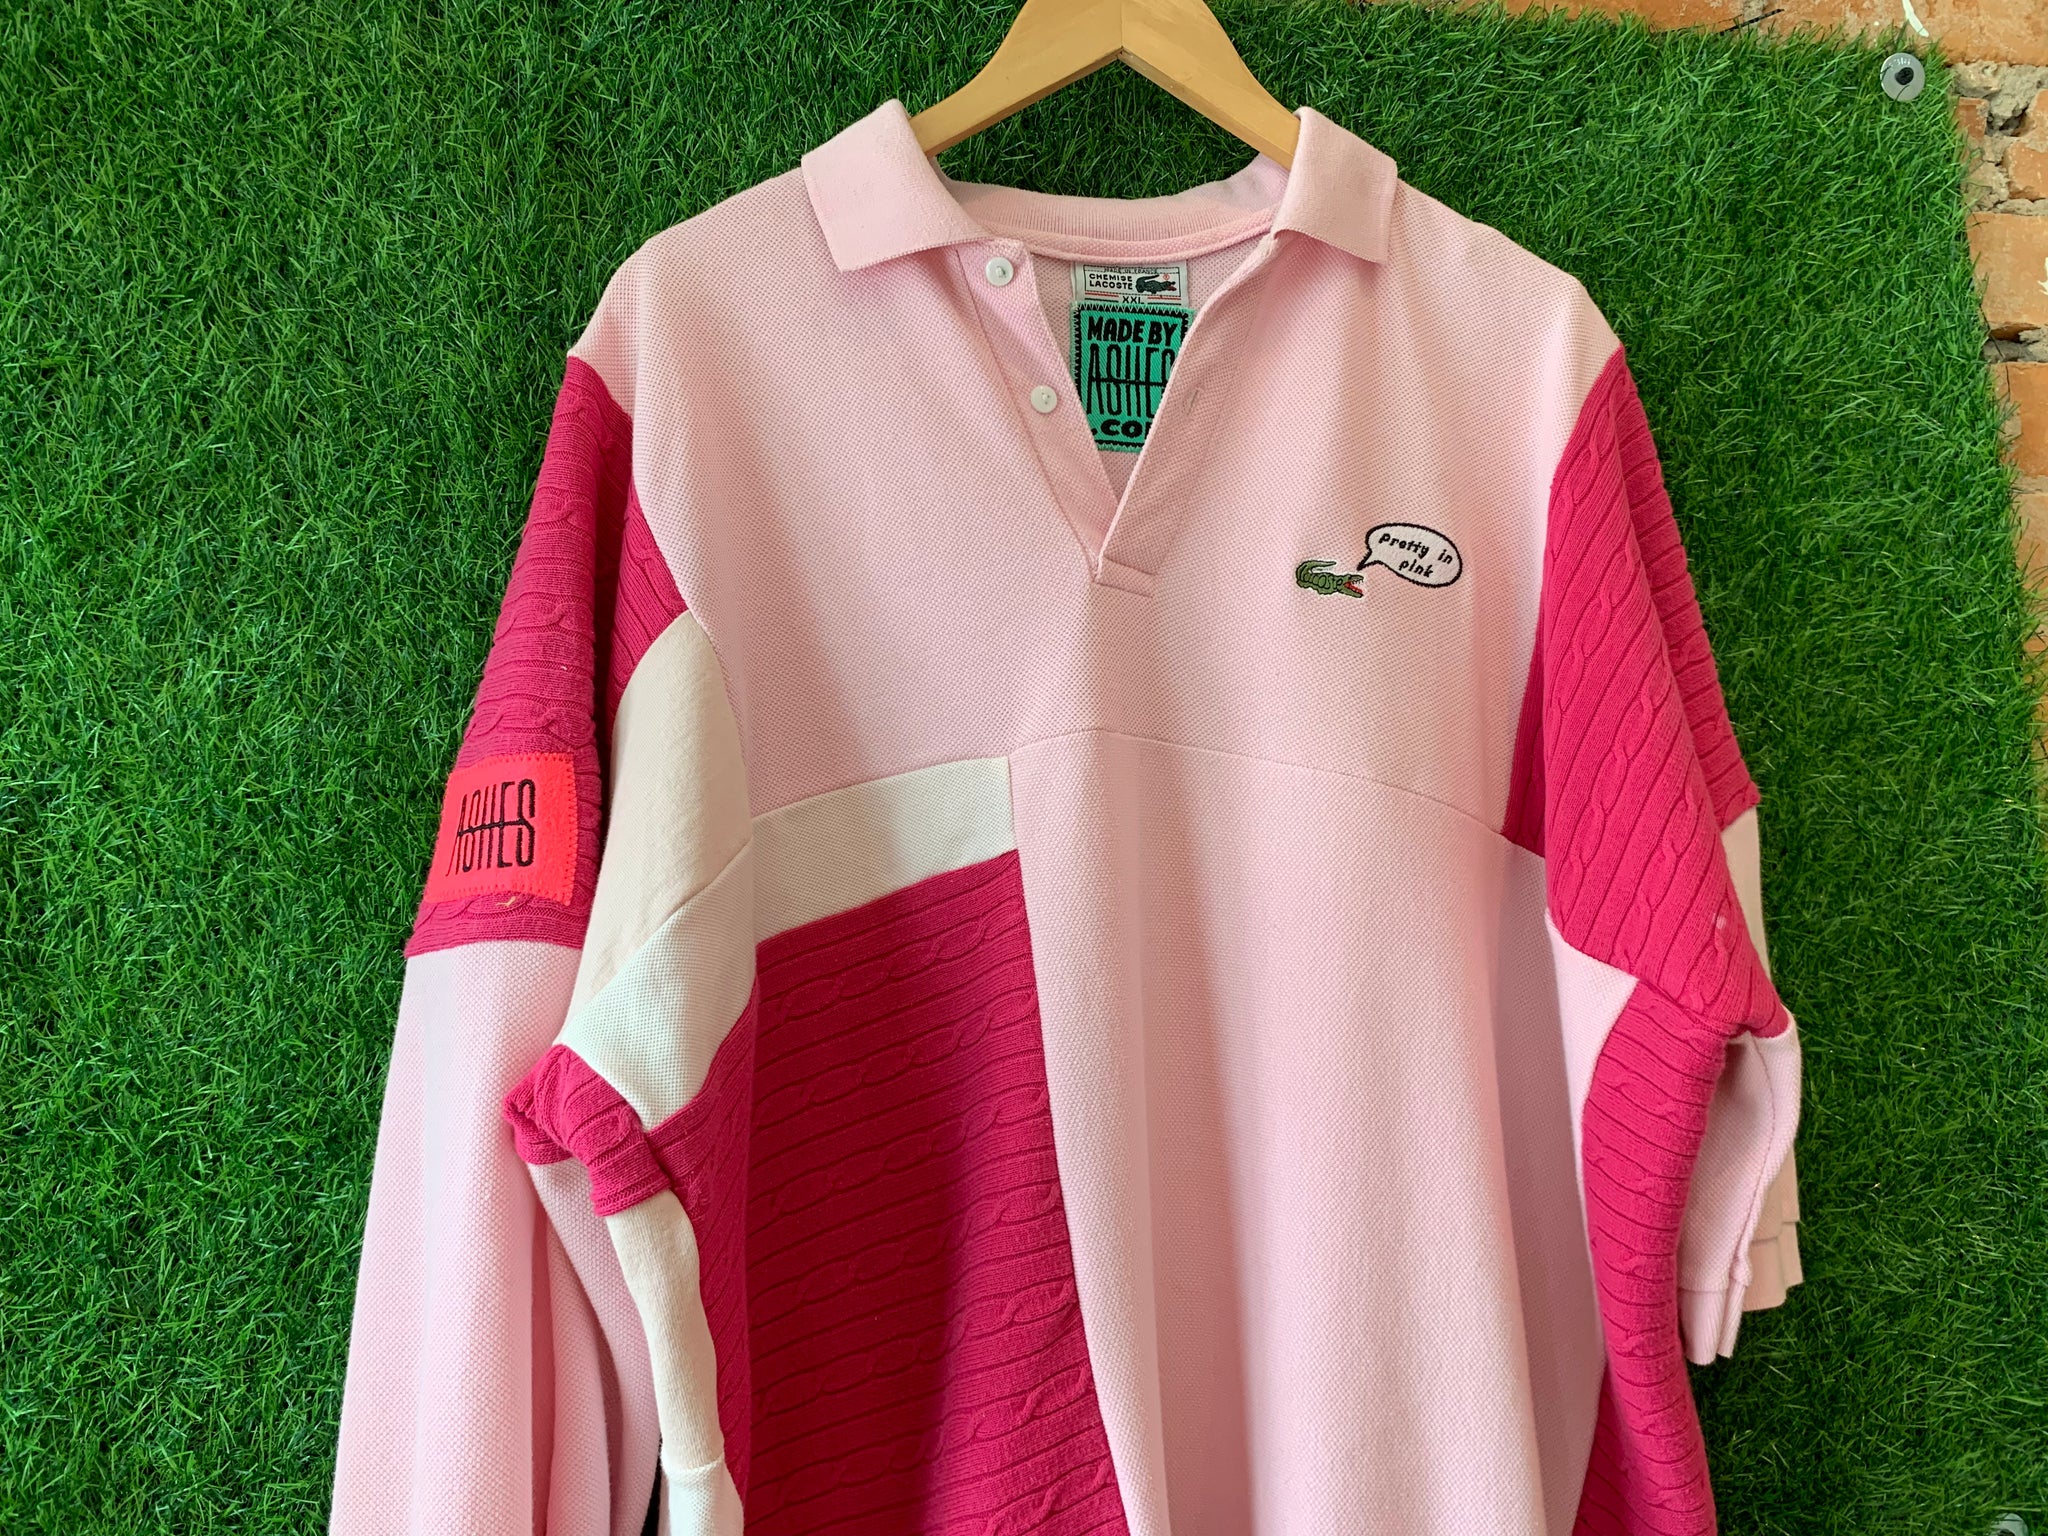 PRETTY IN PINK - POLO - SQUARED AWAY - XL